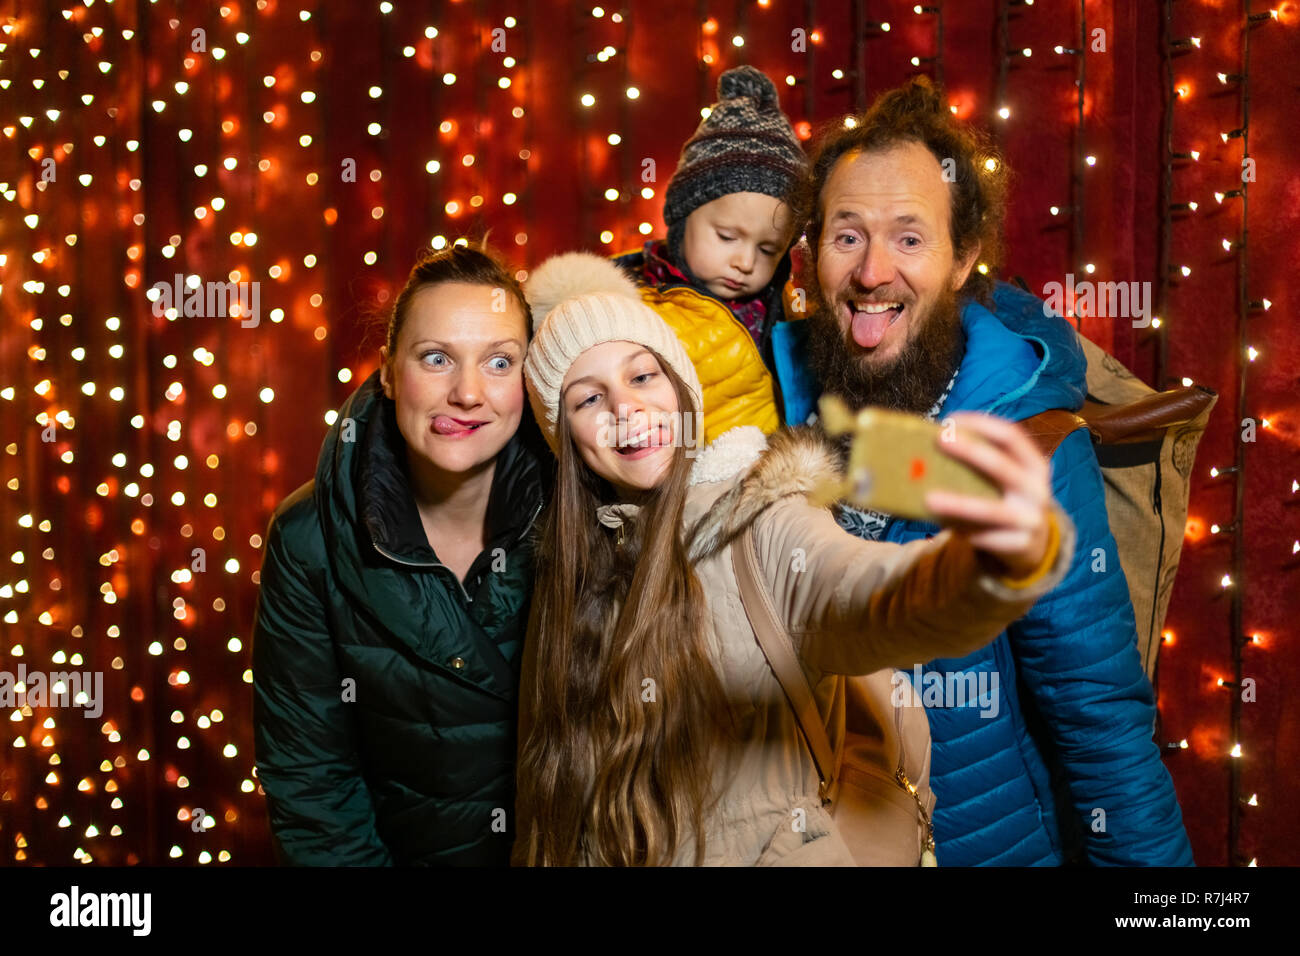 Daughter taking selfie with family at Christmas market. Stock Photo